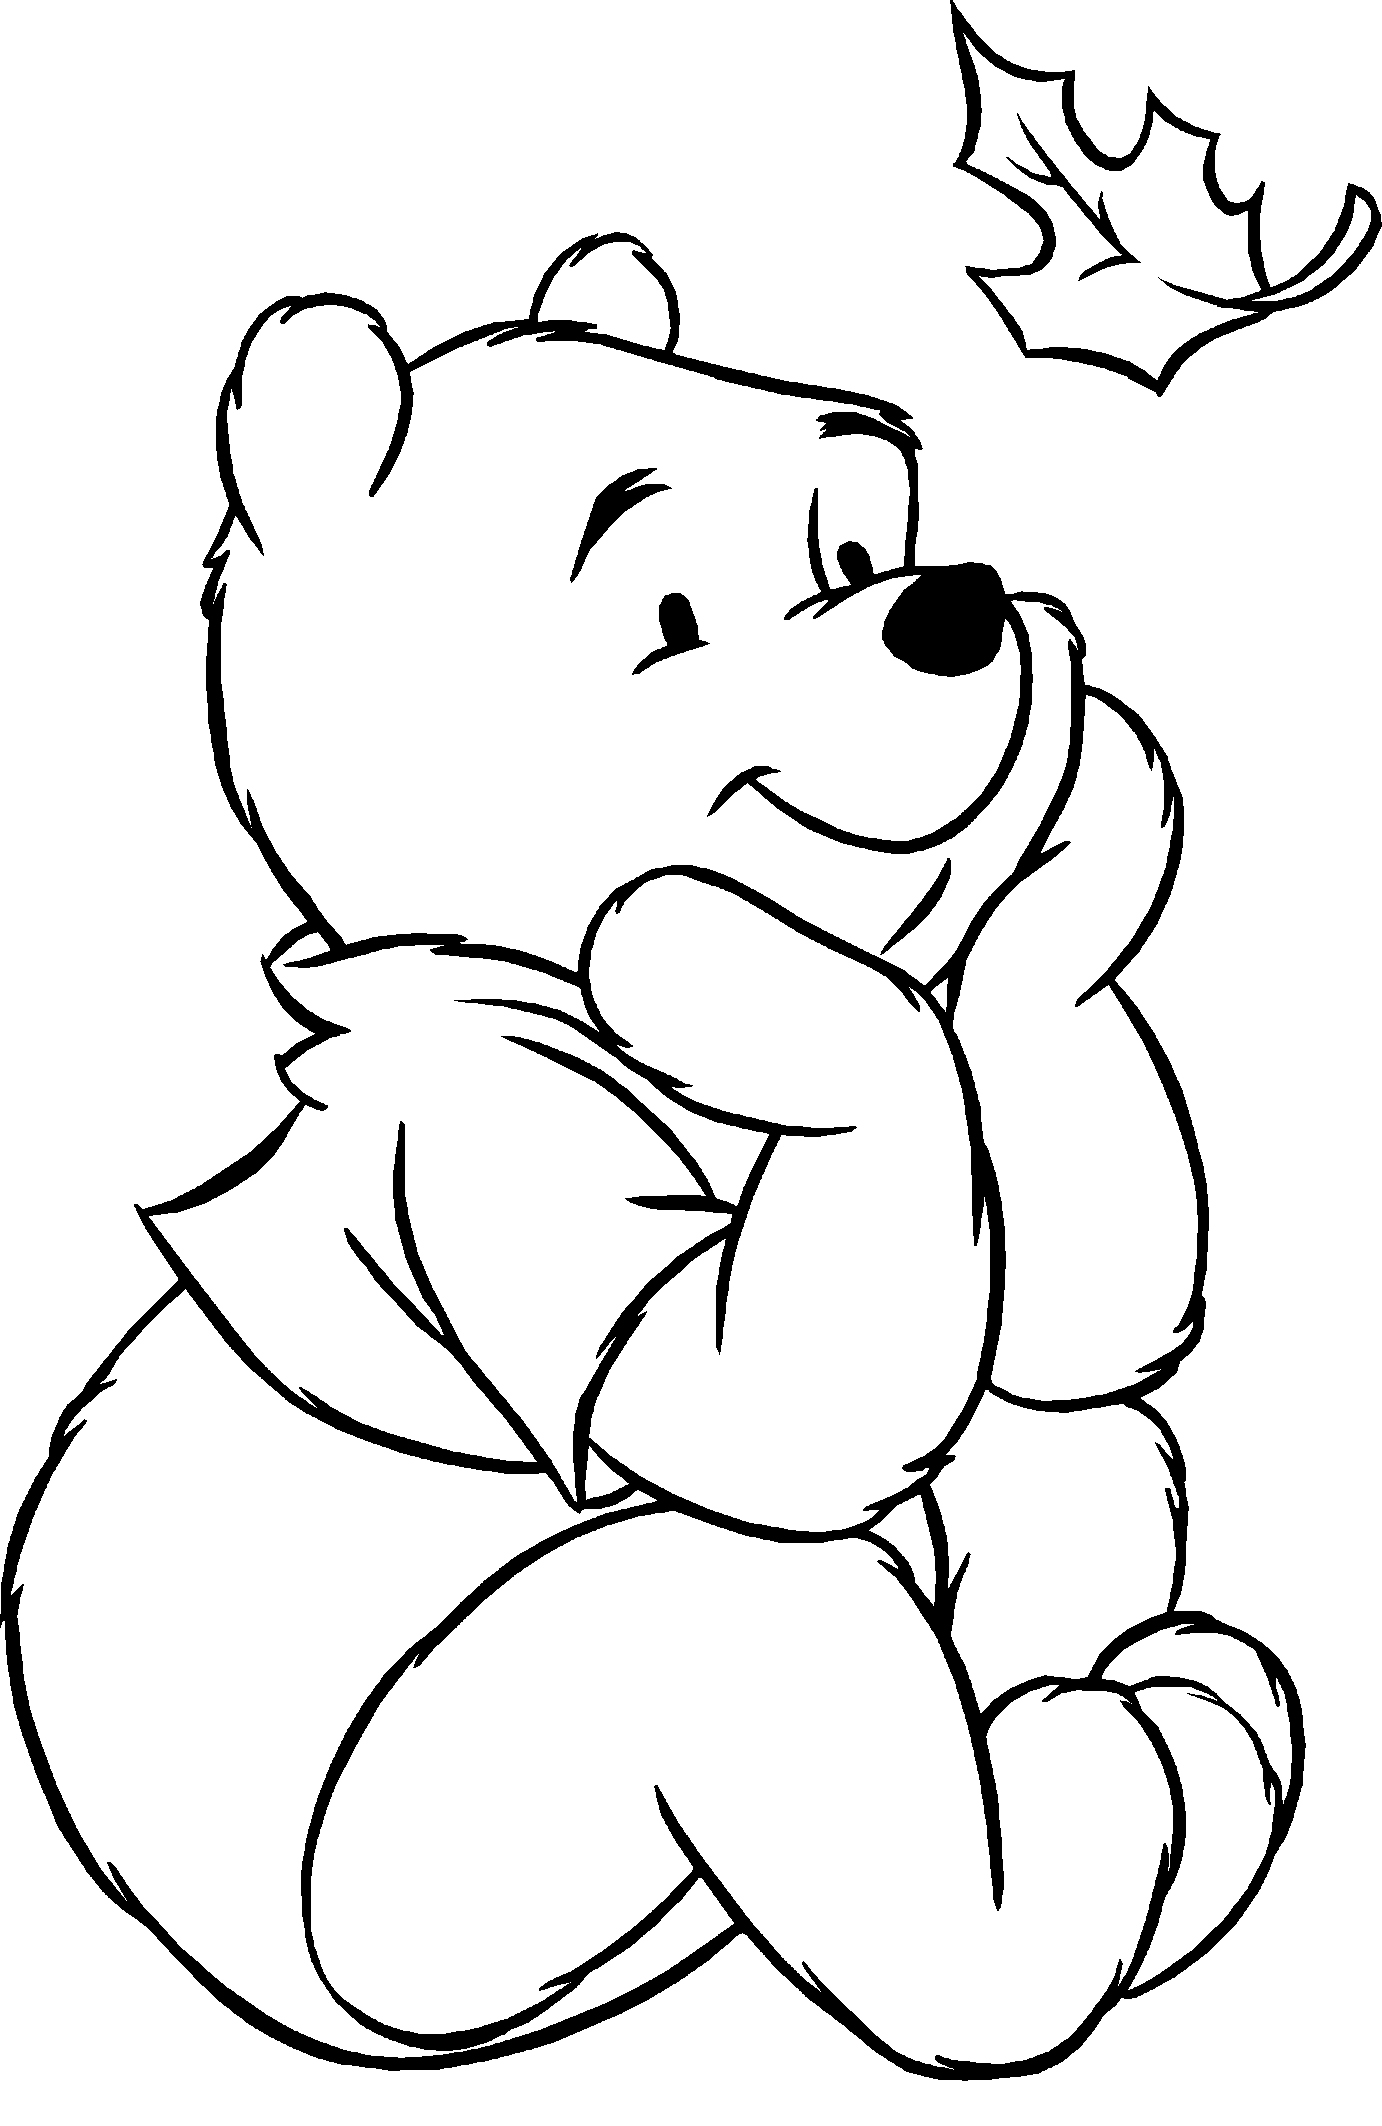  Pooh Coloring Pages 1